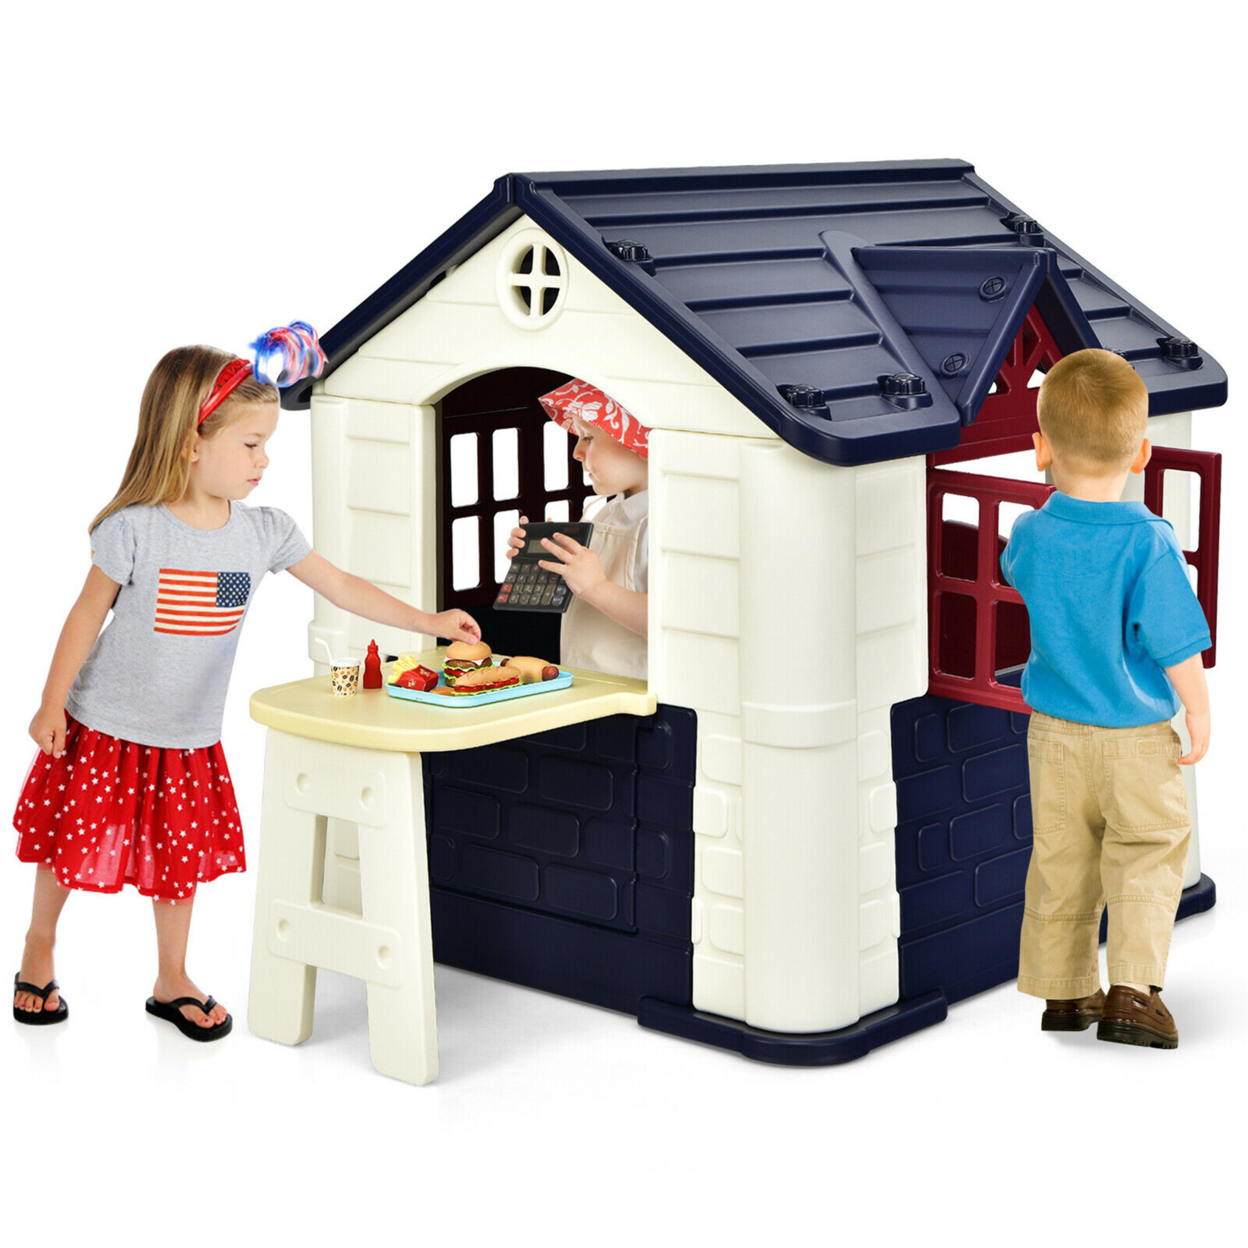 Kid's Playhouse Games Cottage W/ 7 PCS Toy Set & Waterproof Cover - Blue